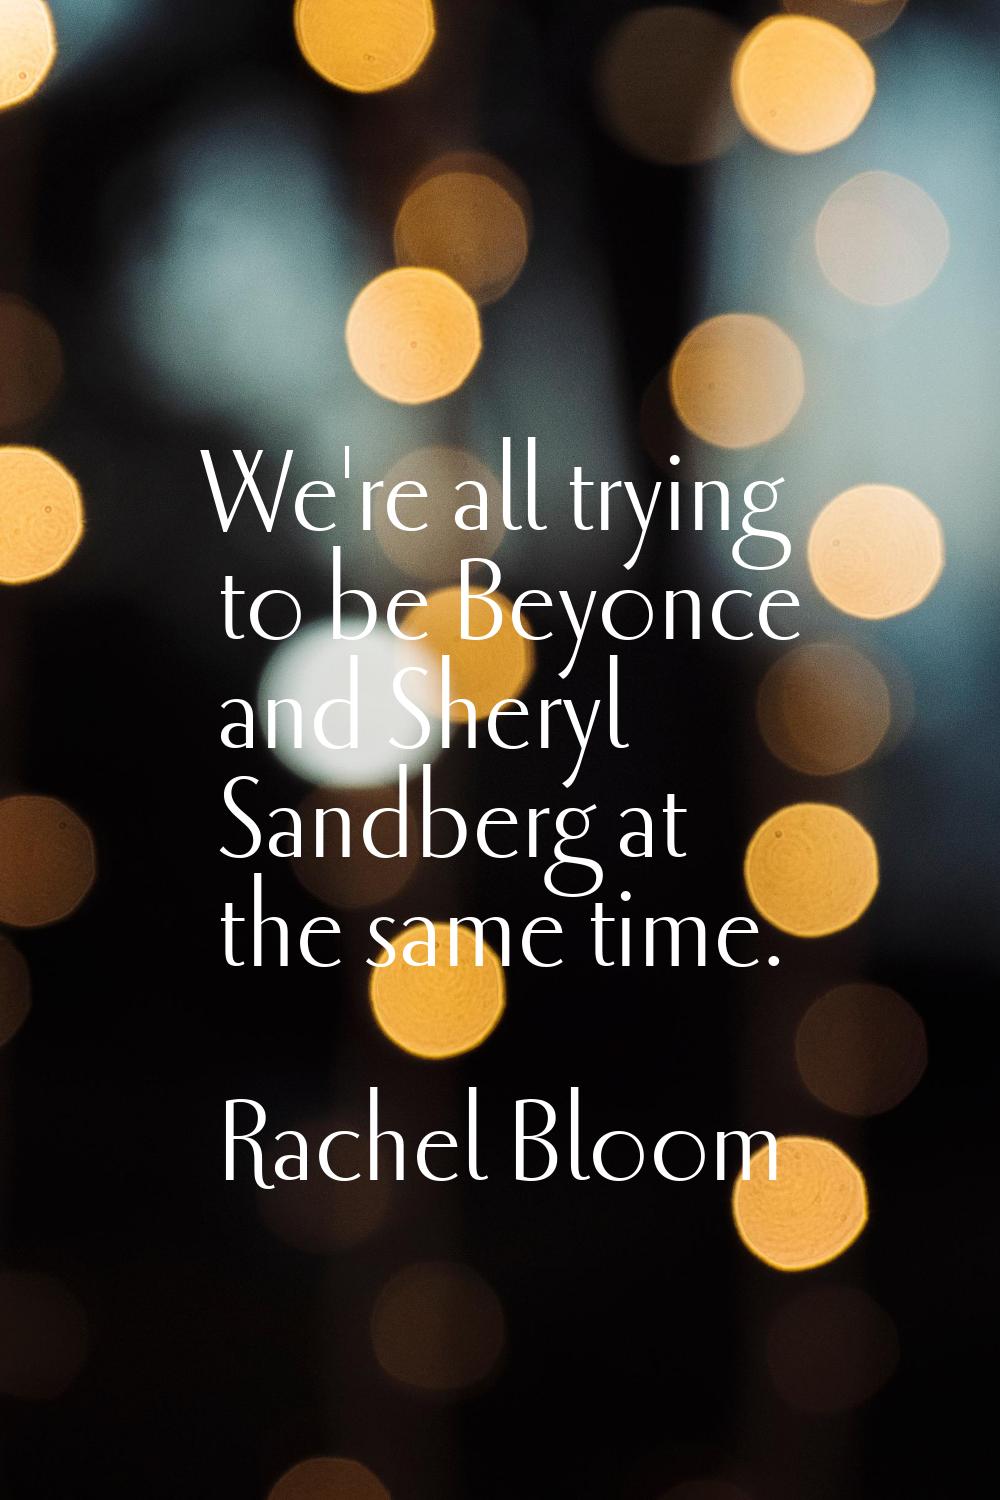 We're all trying to be Beyonce and Sheryl Sandberg at the same time.